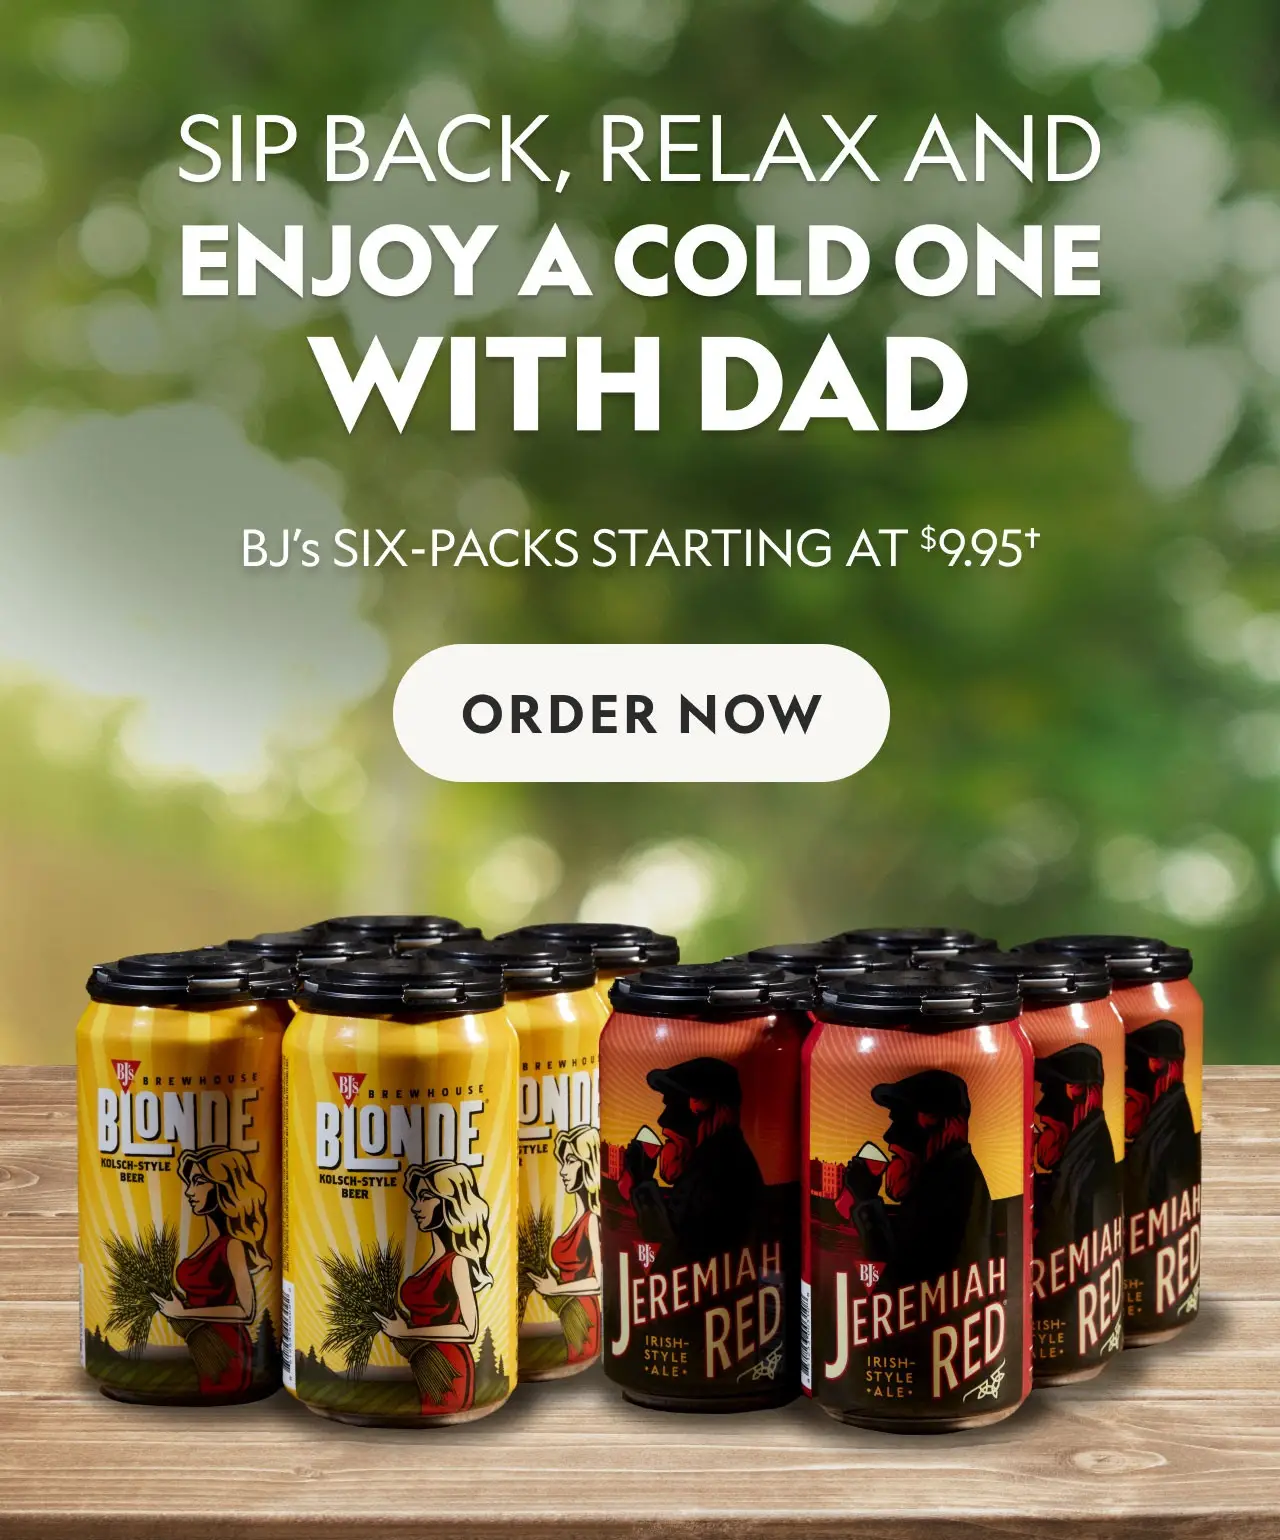 BJ's Restaurant & Brewhouse Father's Day Get 6-Packs of BJ's Handcrafted Signature Beer starting at $9.95